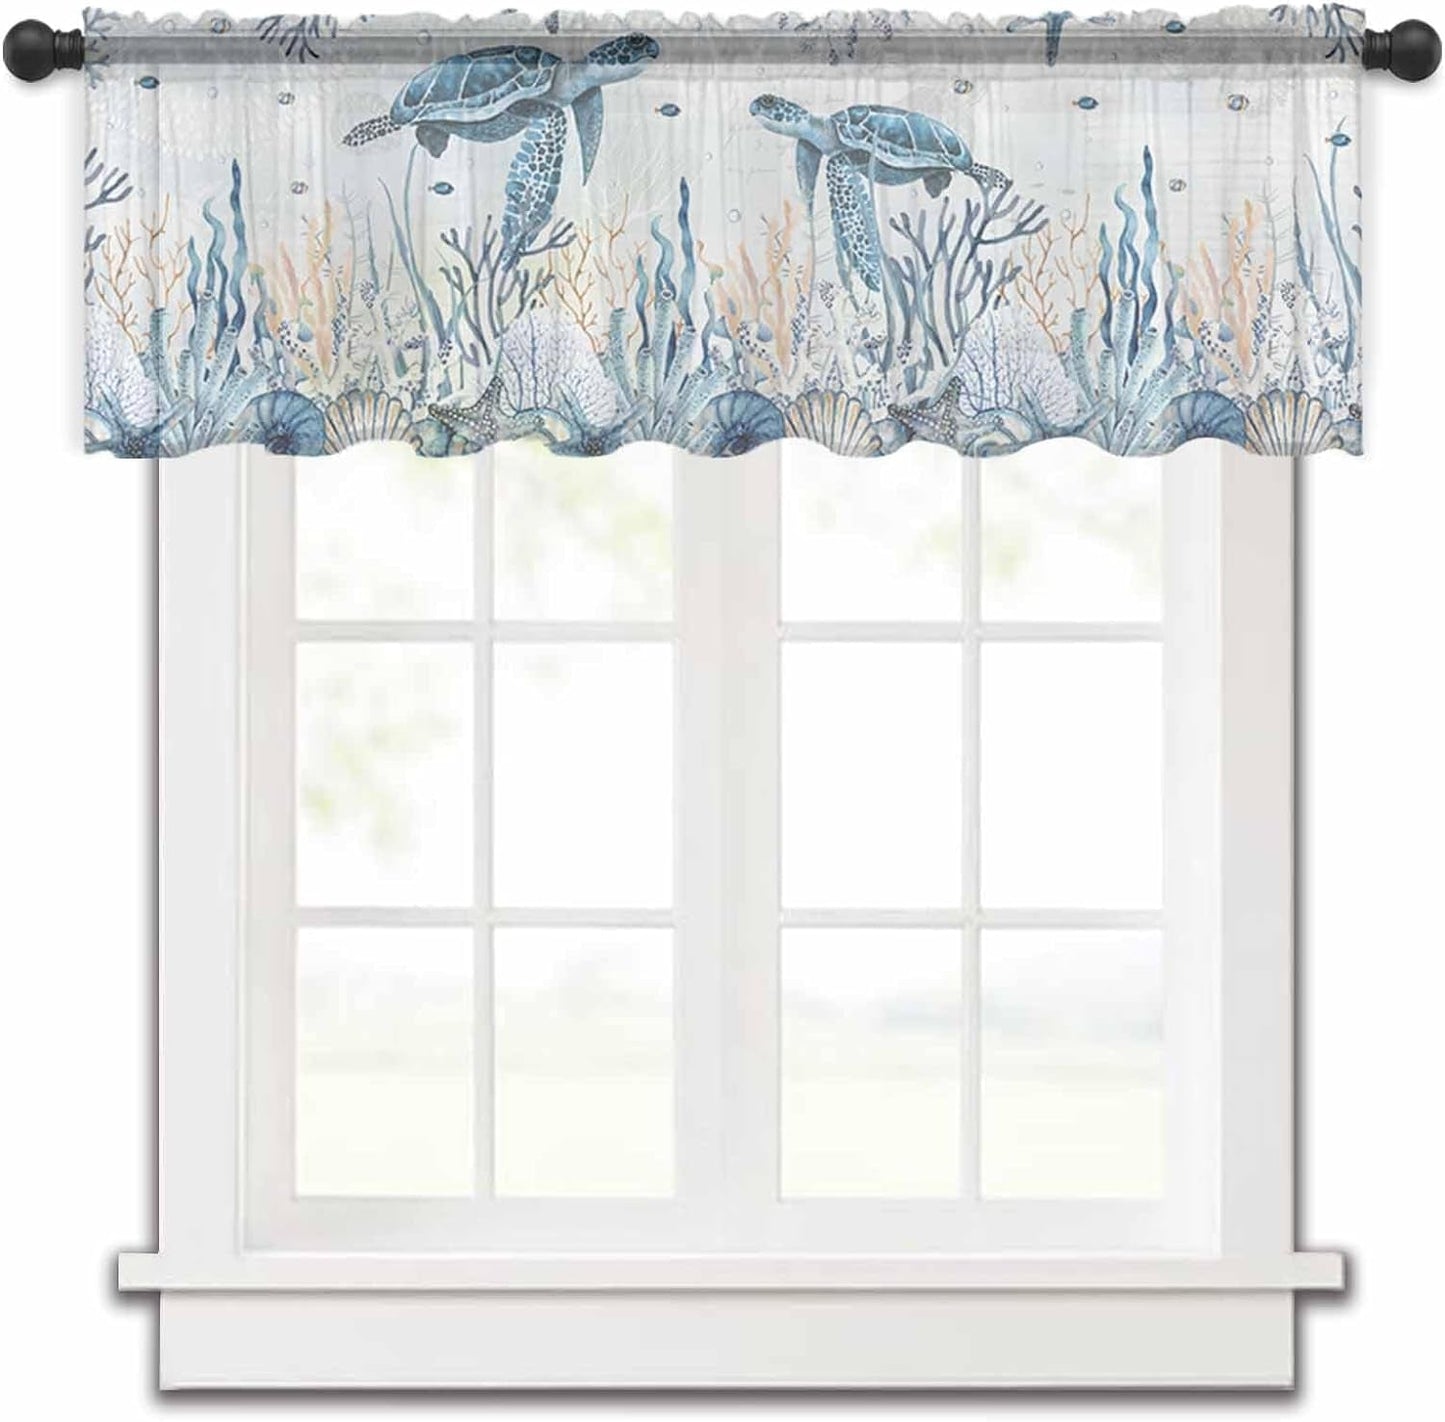 Nautical Coastal Turtle Valance Curtains for Kitchen/Living Room/Bathroom/Bedroom Window,Rod Pocket Small Topper Half Short Window Curtains Voile Sheer Scarf, Coral Starfish Seashell Seahorse 42"X12"